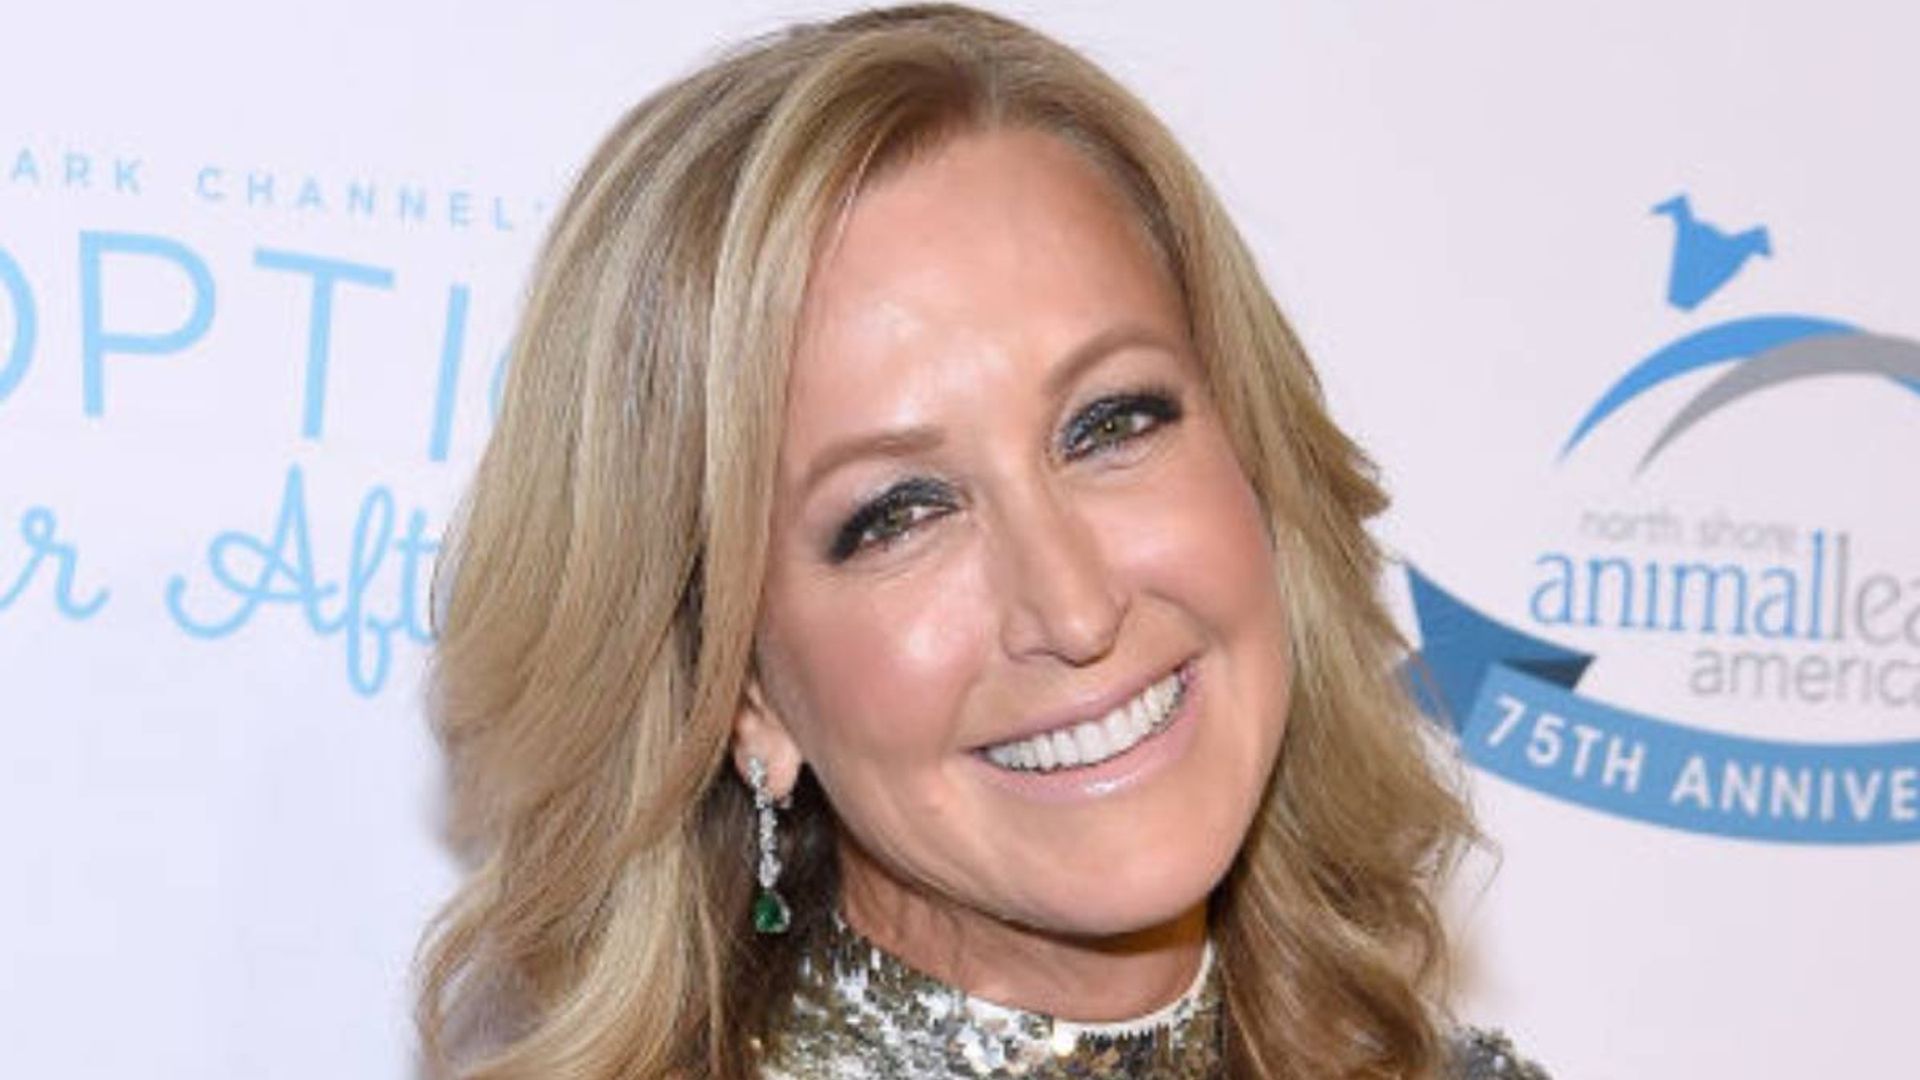 GMA's Lara Spencer delights fans with celebratory photos with her lookalike children